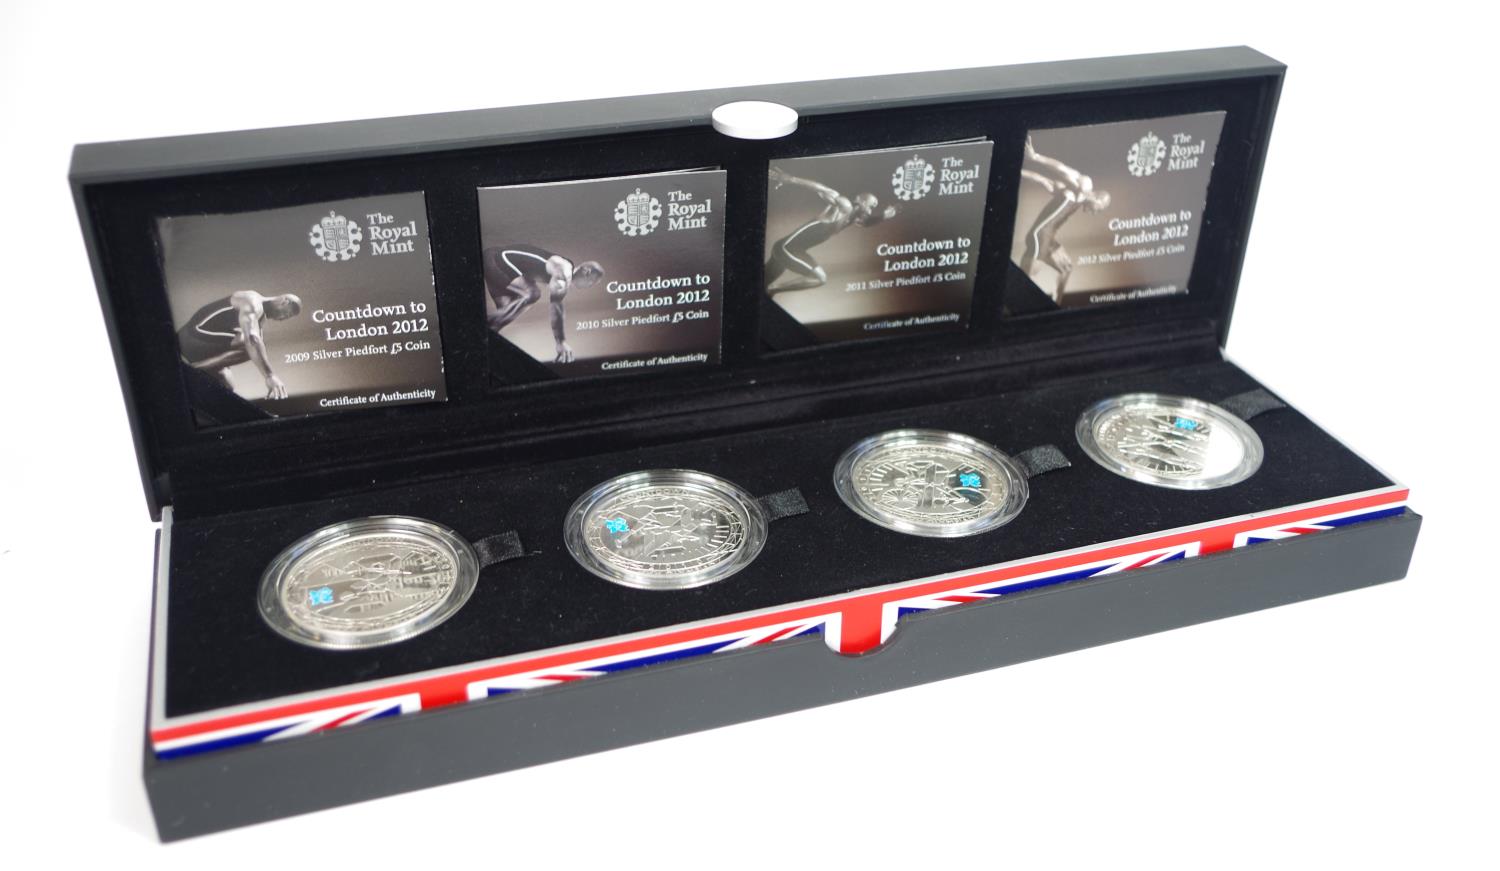 Five Pounds silver proof piedfort four coin set "Countdown to London" aFDC boxed as issued